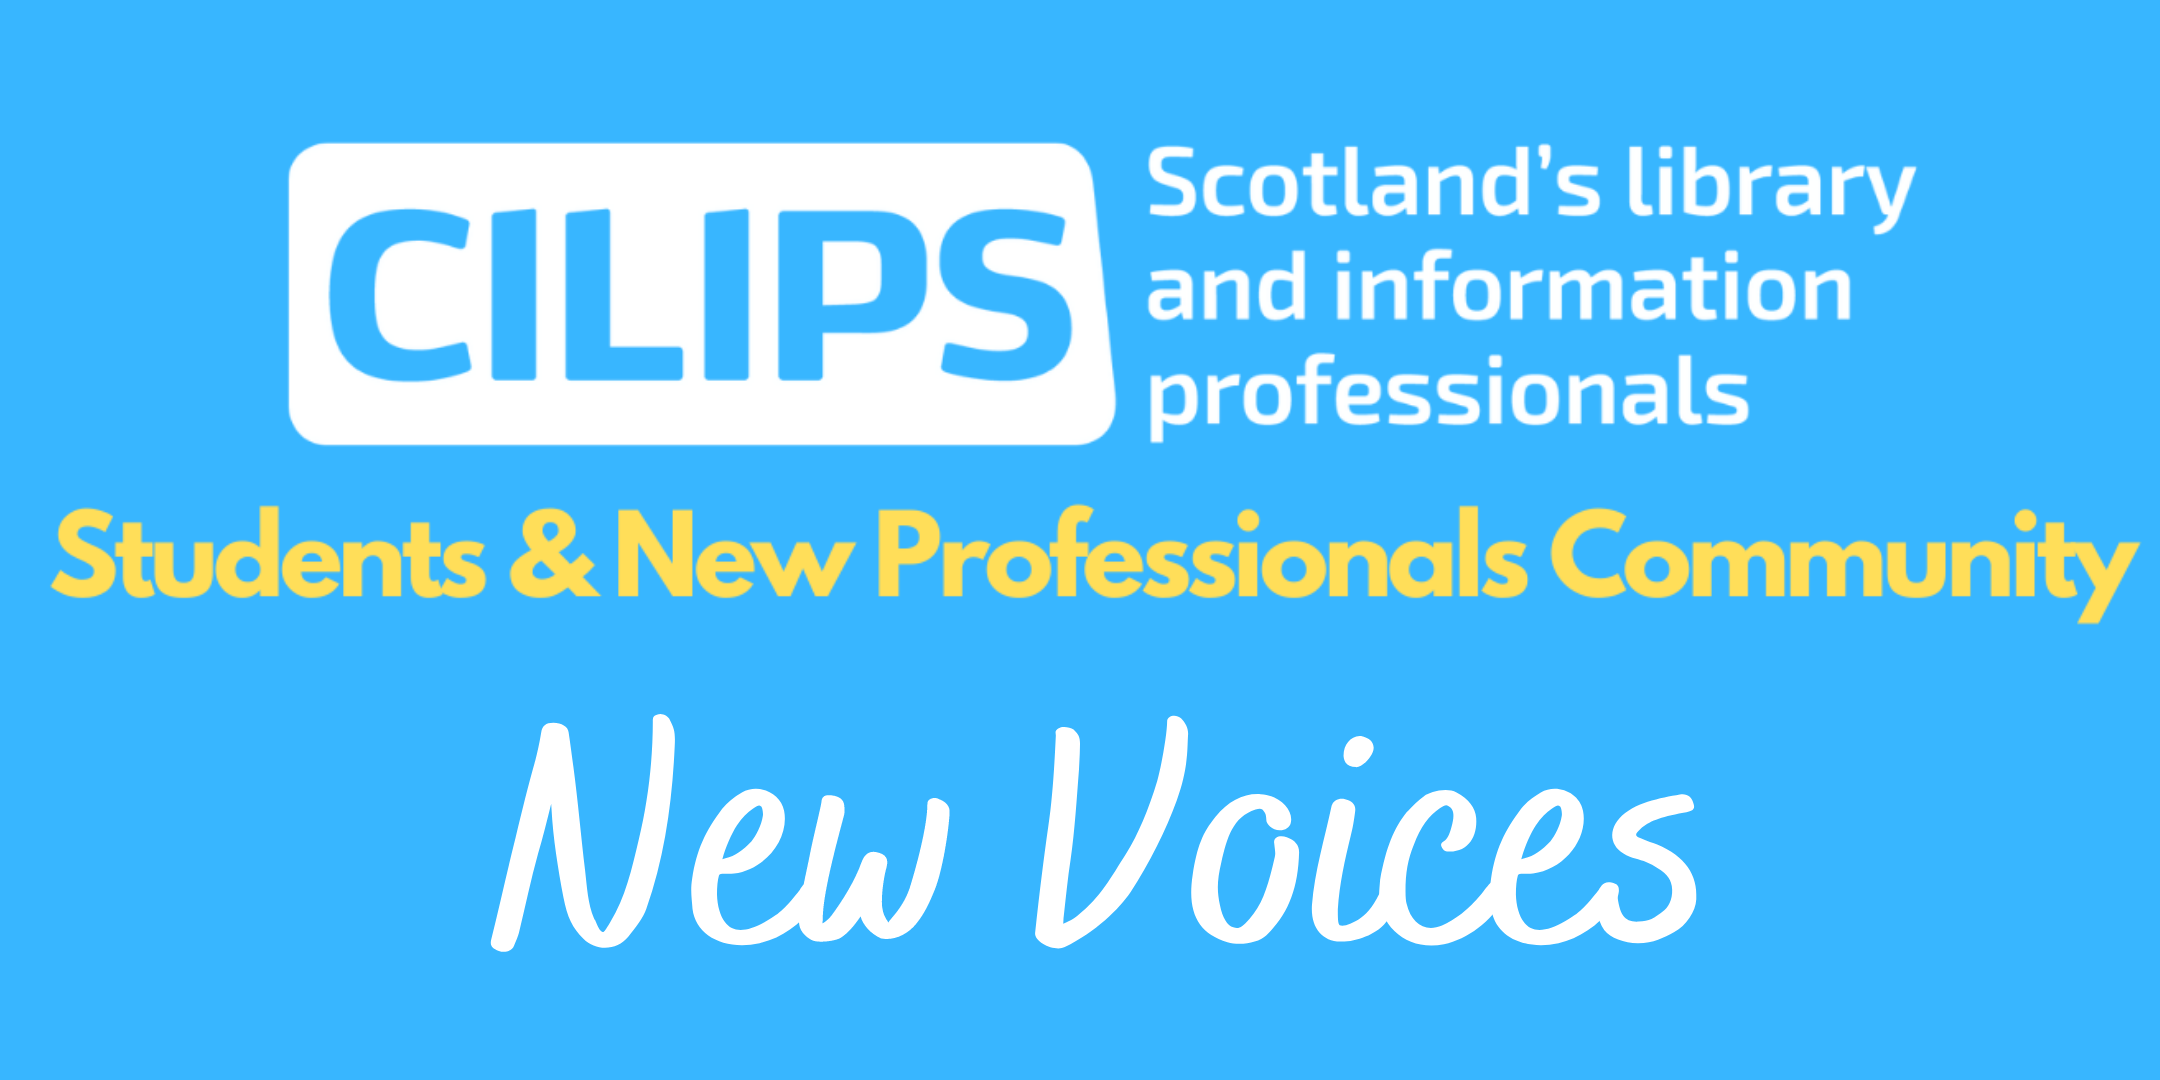 The CILIPS SNPC 'New Voices' blog logo, with white and yellow text on a turquoise background